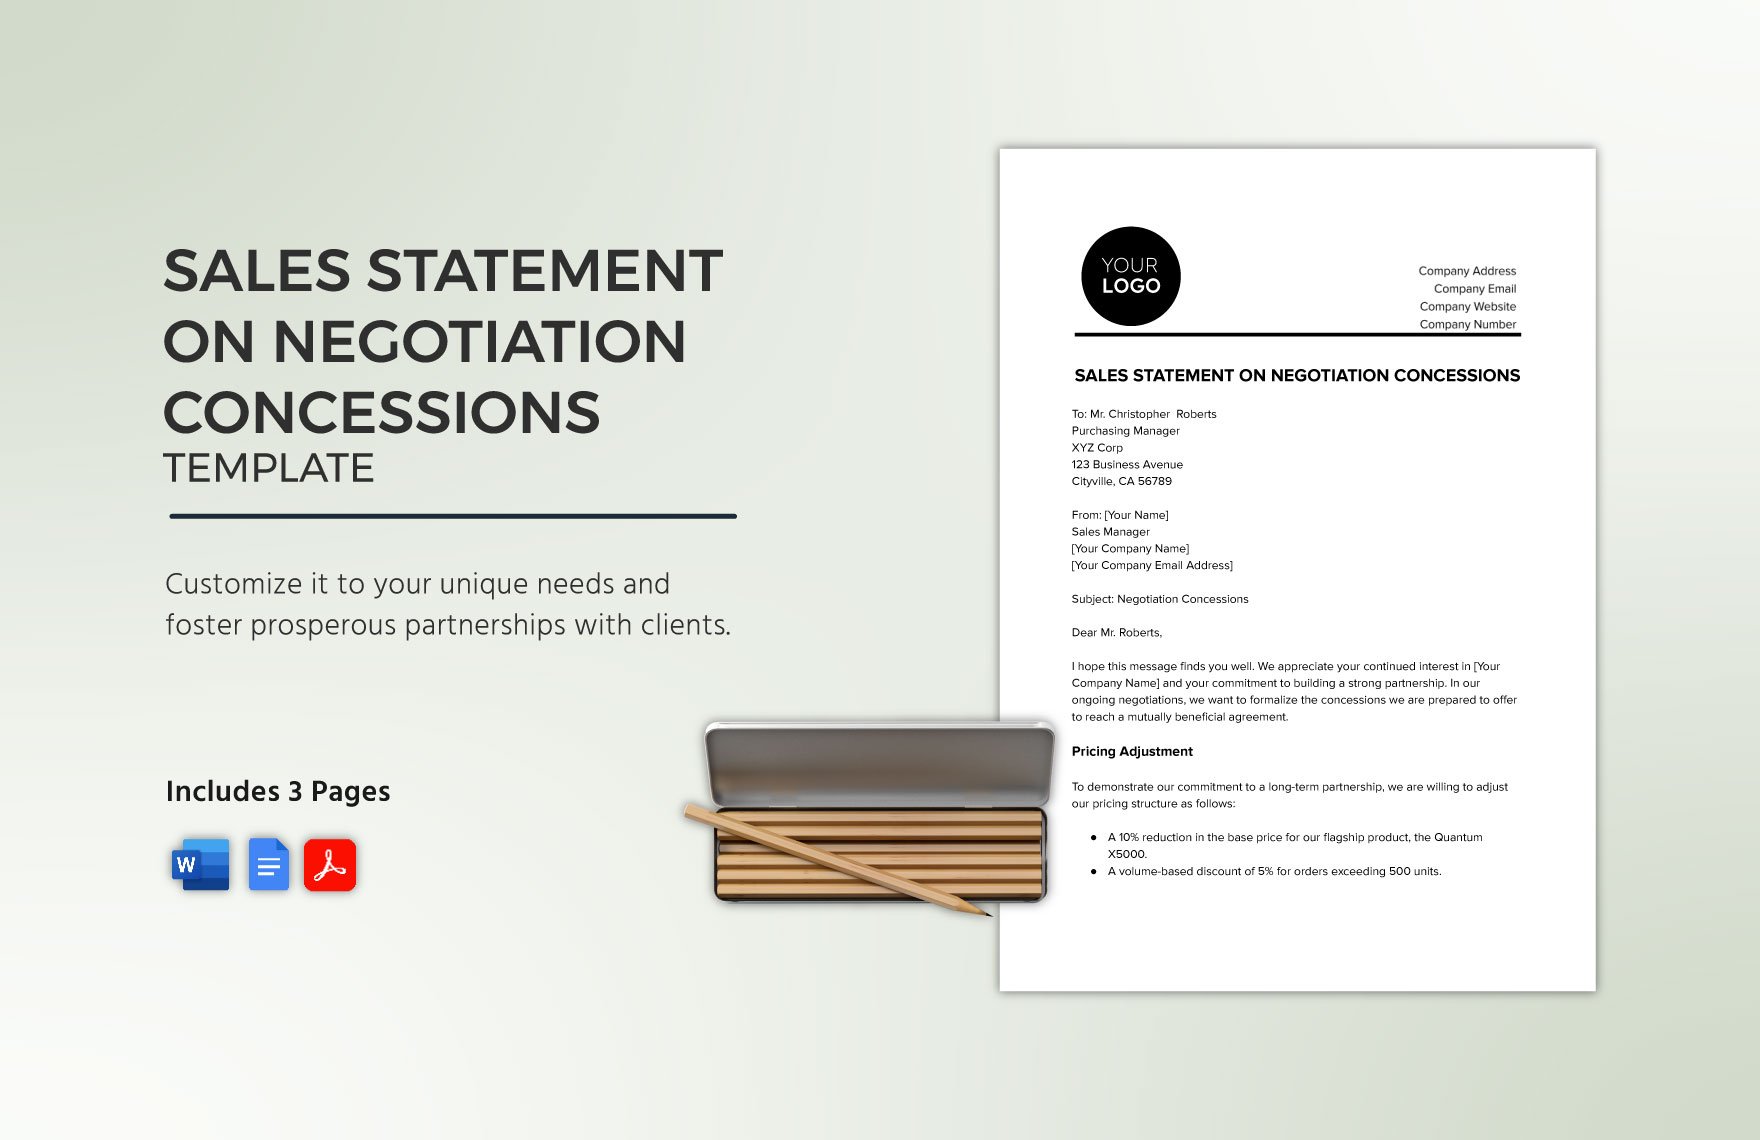 Sales Statement on Negotiation Concessions Template